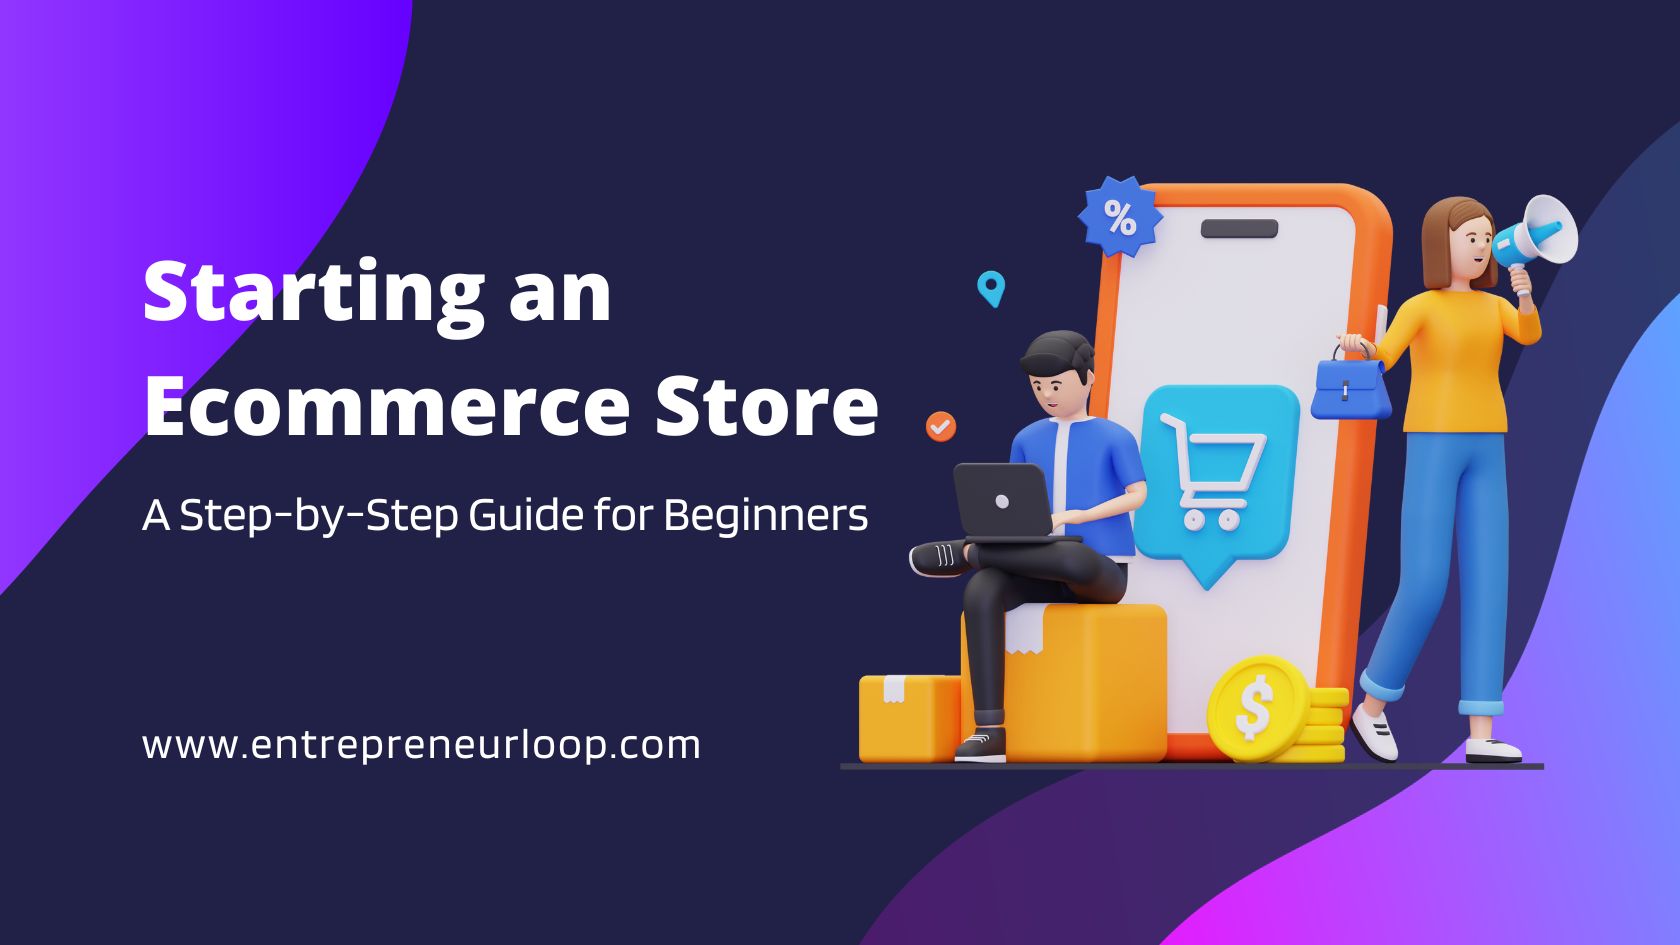 Starting An Ecommerce Store: A Step-By-Step Guide For Beginners